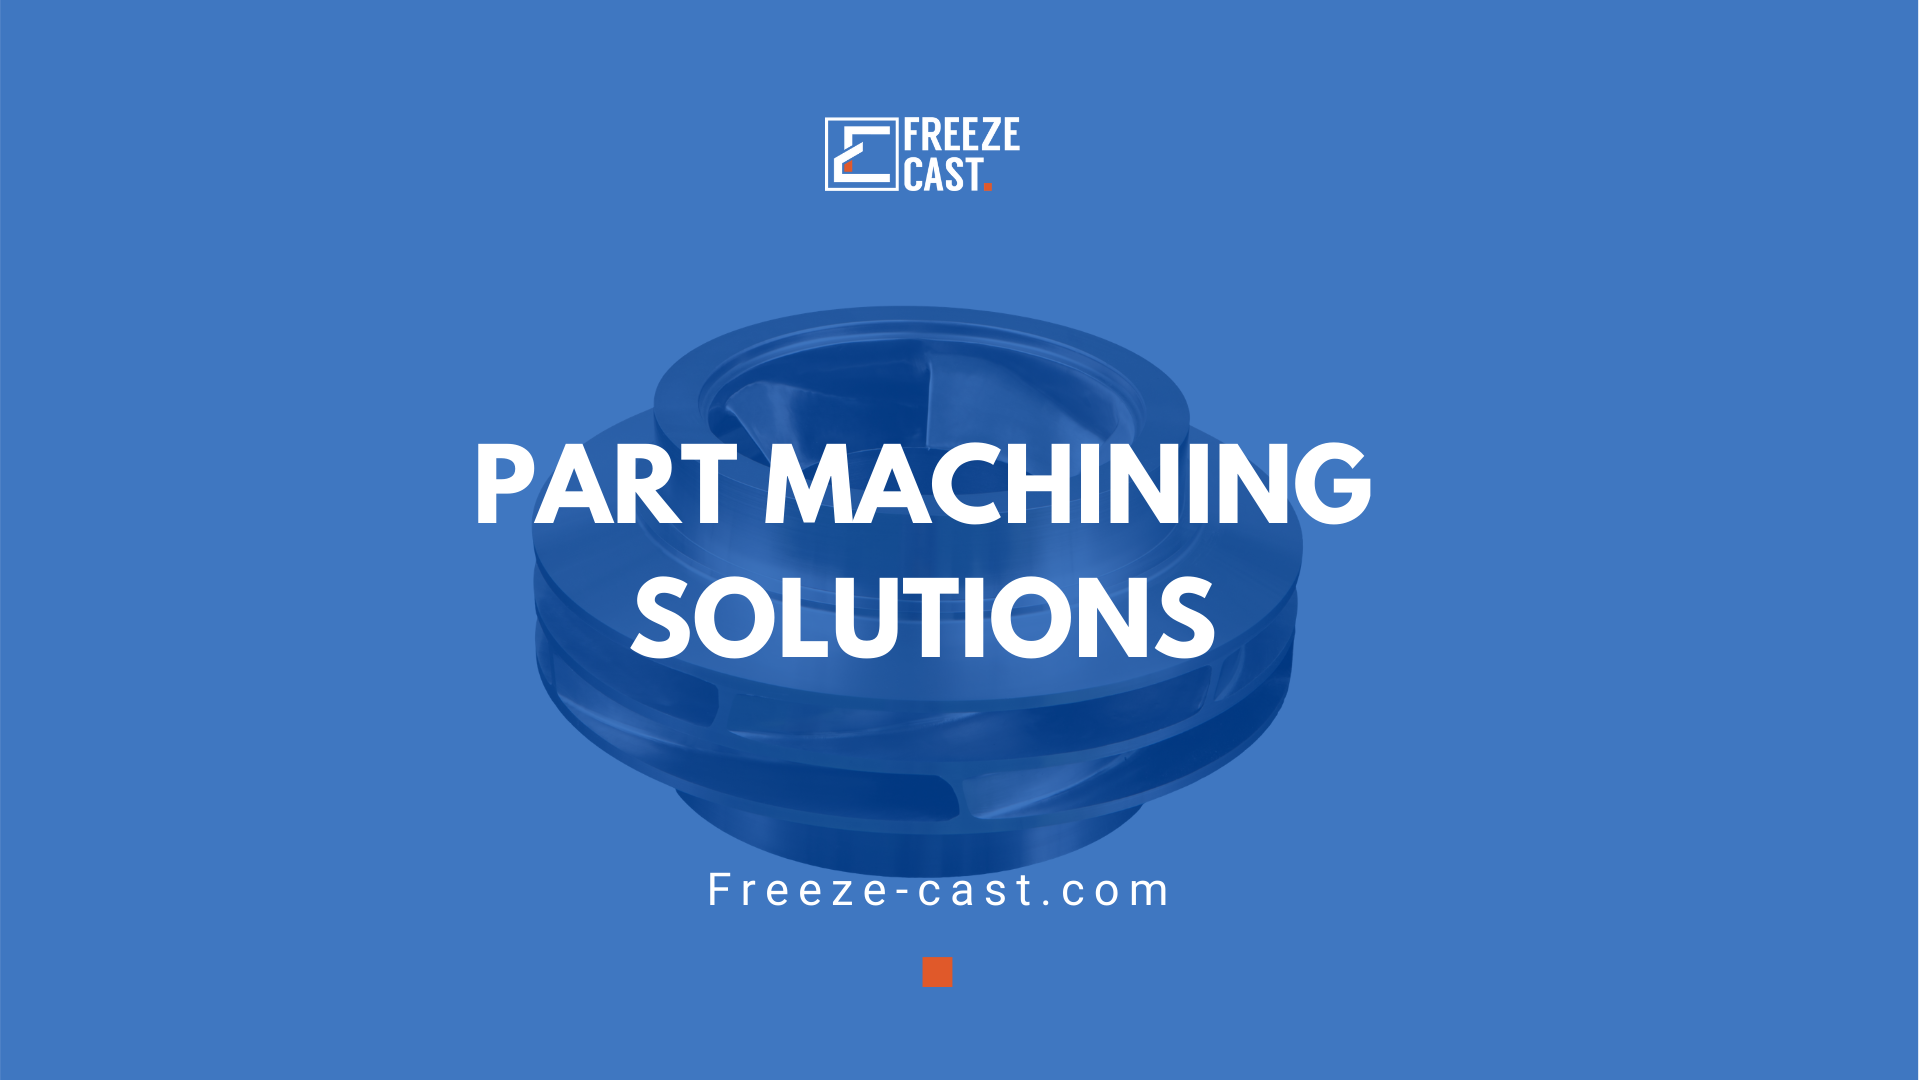 Part machining solutions